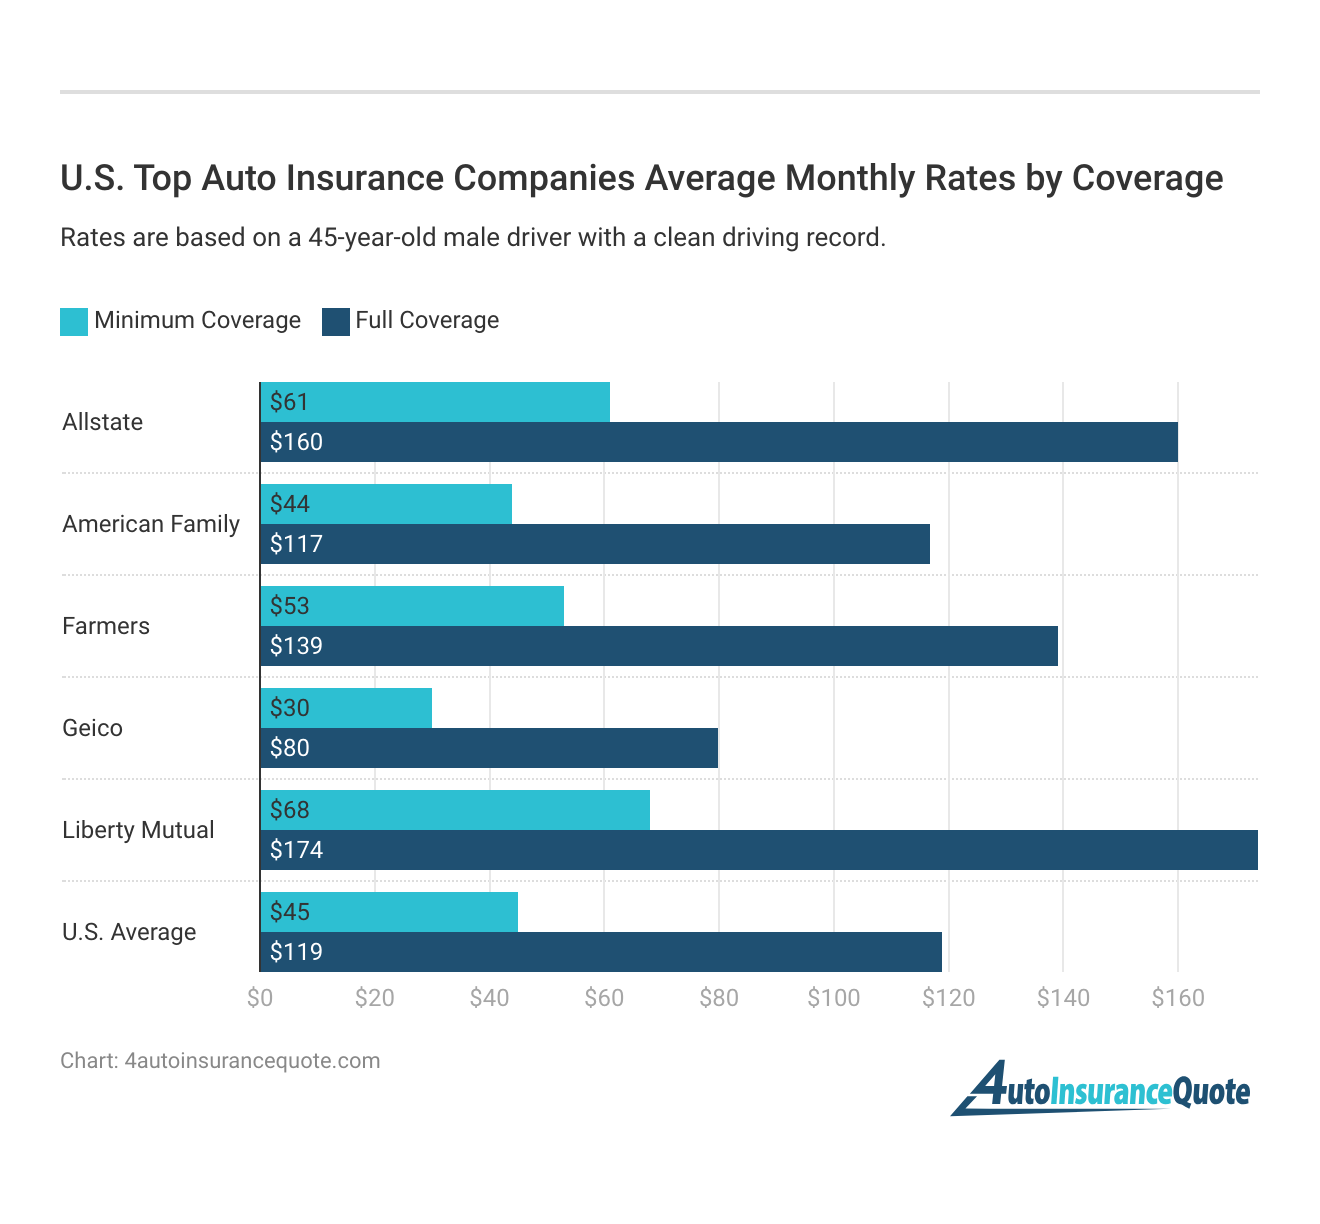 <h3>U.S. Top Auto Insurance Companies Average Monthly Rates by Coverage</h3>